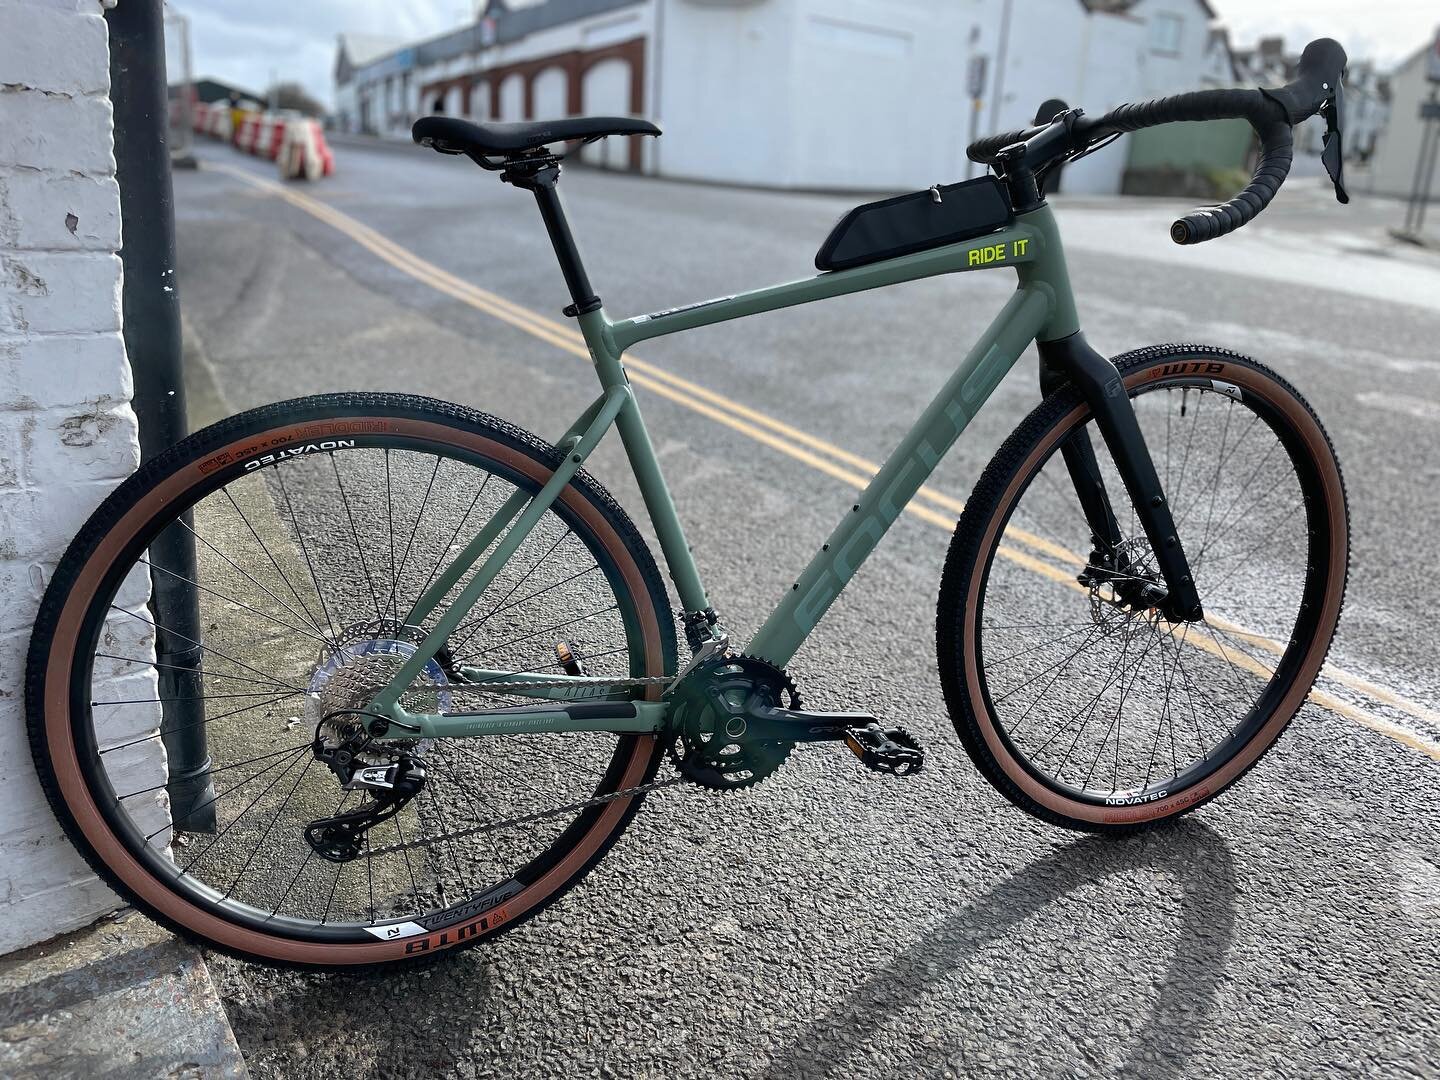 The very sweet focus atlas 6.8 gravel bike has arrived in small, medium and large. 
2x11 GRX, lightweight alloy frame with carbon fork, comes as 700c but can take 27.5&rdquo; wheels up to 2.1&rdquo;. 
It&rsquo;s a lot of well spec&rsquo;d bike that&r